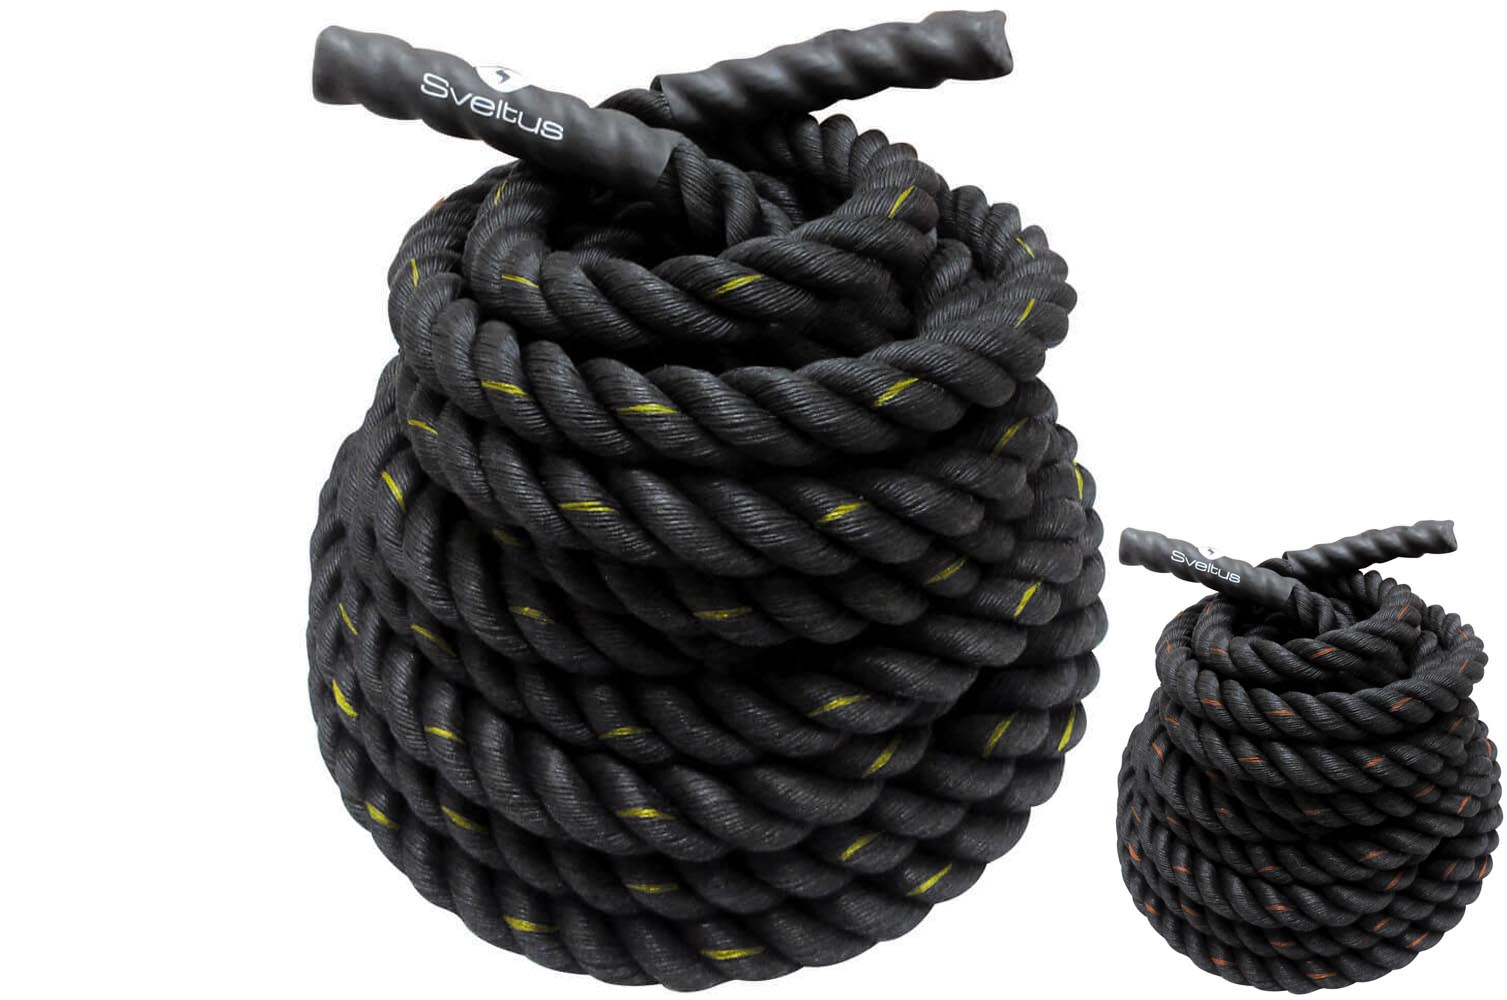 T-PRO Battle rope (training rope) - 4 lengths